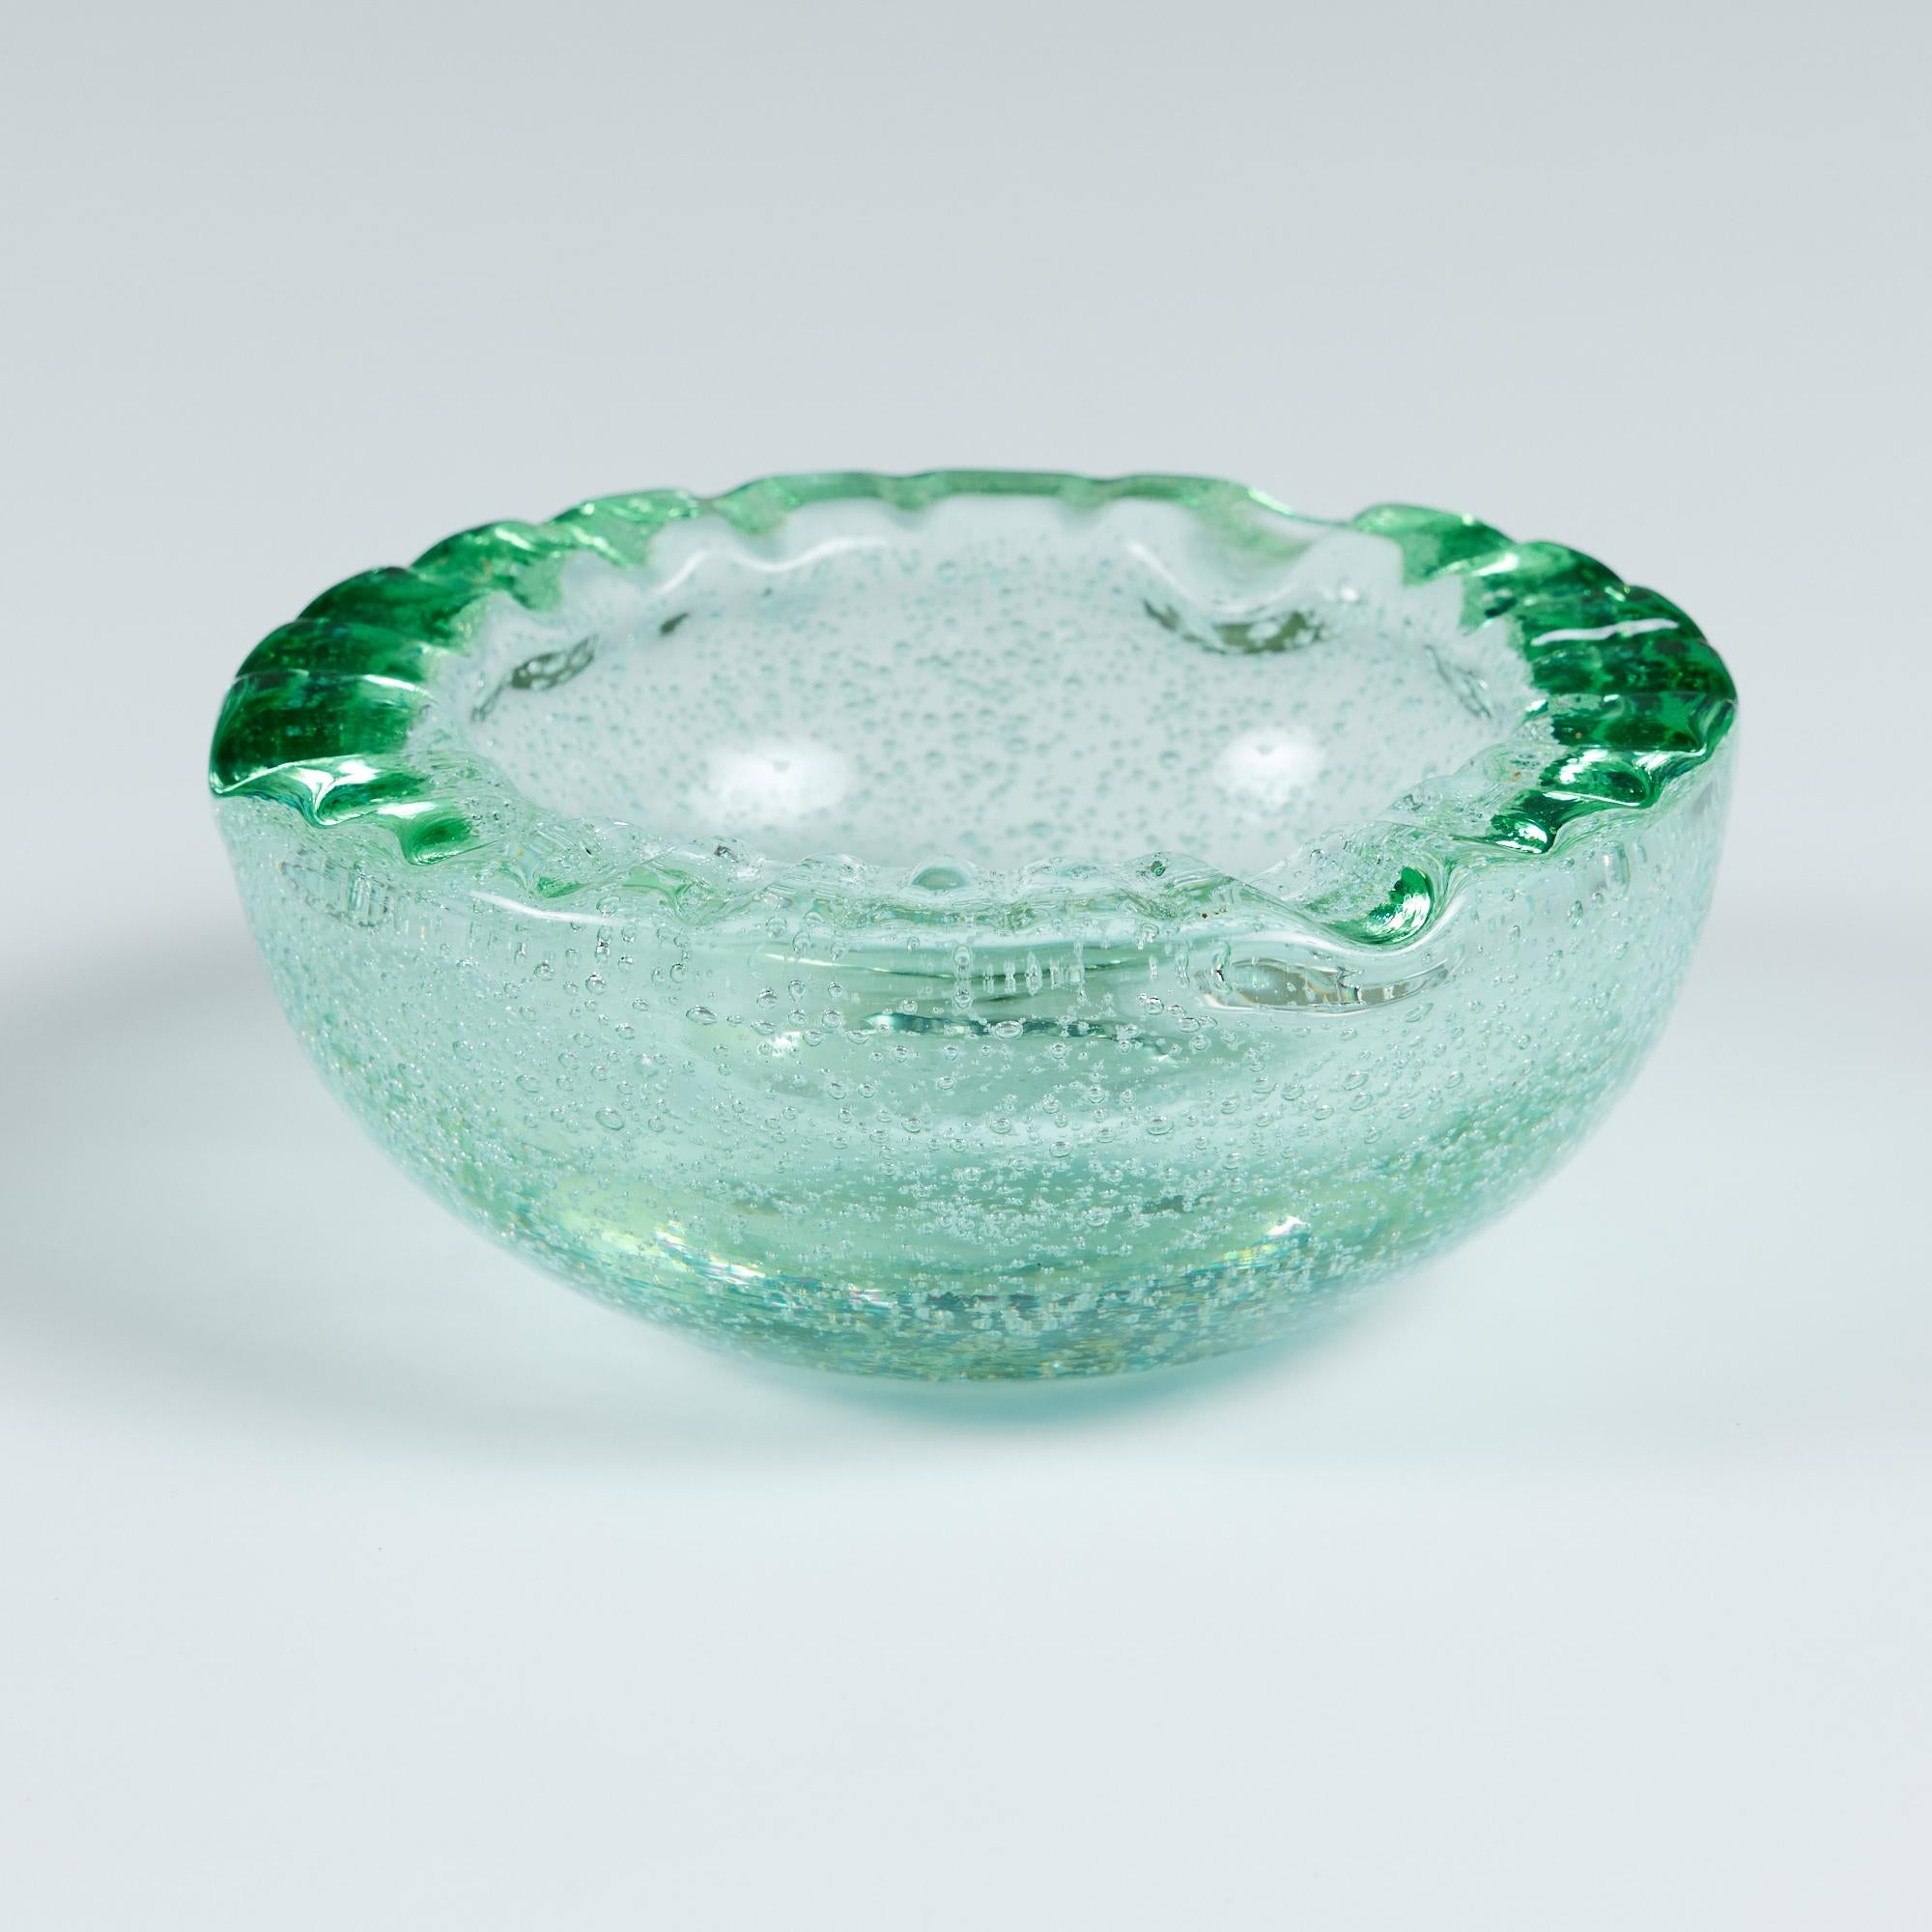 Round glass ashtray or catchall by Daum House which started in 1878 in Nancy, France. This piece, created in the mid 20th century, has an all over bubble throughout the green colored glass. The rounded dish has divots around the rim, perfect for a